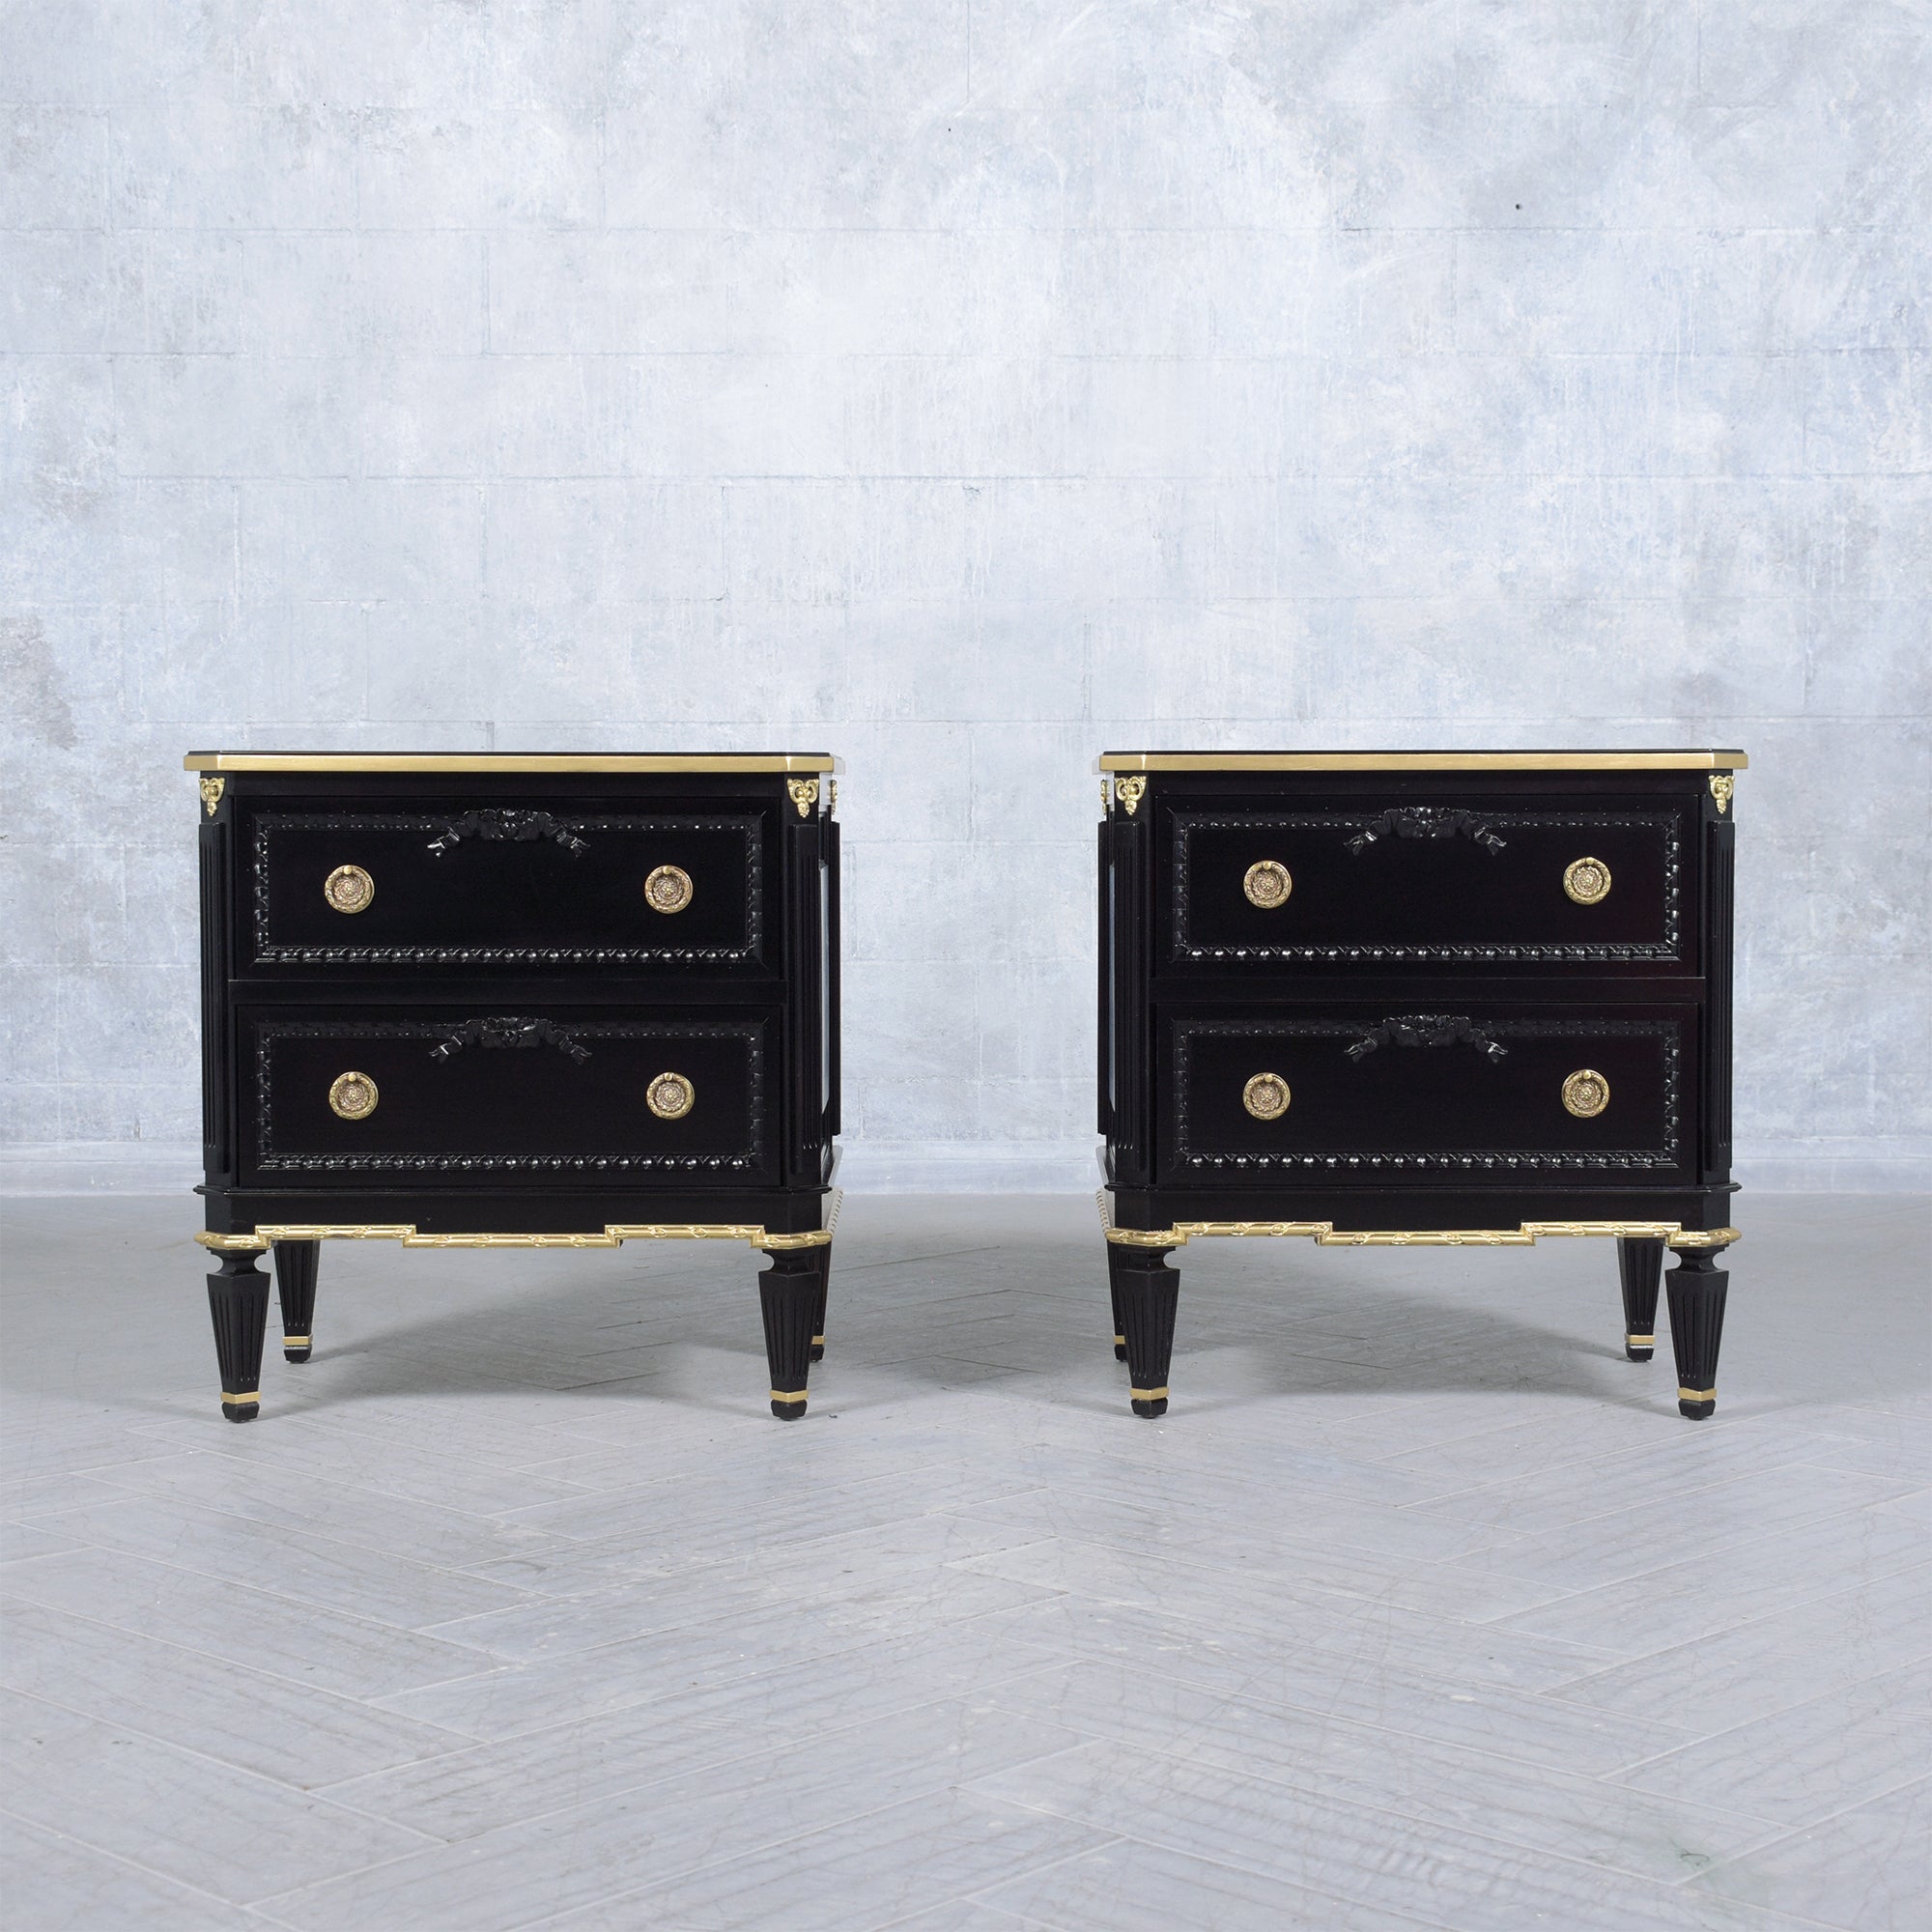 Step into an era of classic elegance with our beautifully restored pair of Louis XVI-style commodes. Crafted with precision from the finest mahogany wood, these vintage nightstands stand out with their ebonized shade, further elevated by tasteful